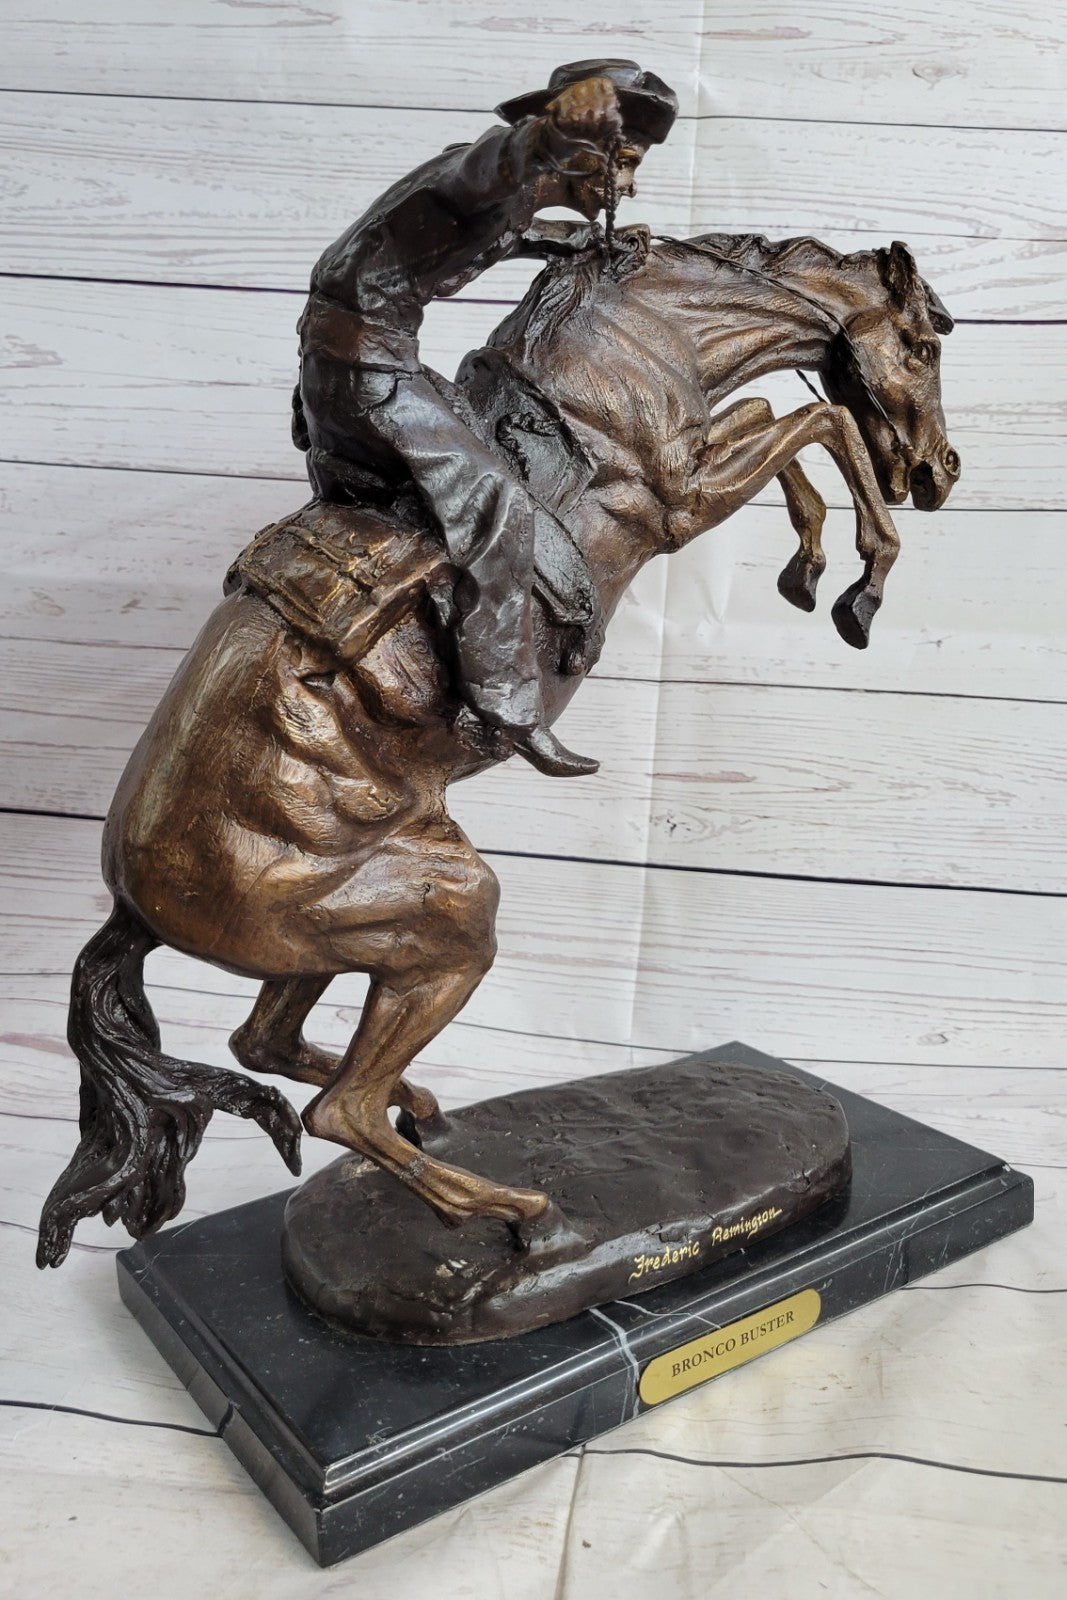 Bronco Buster Solid Bronze Collectible Sculpture Statue by F. Remington 18" Sale